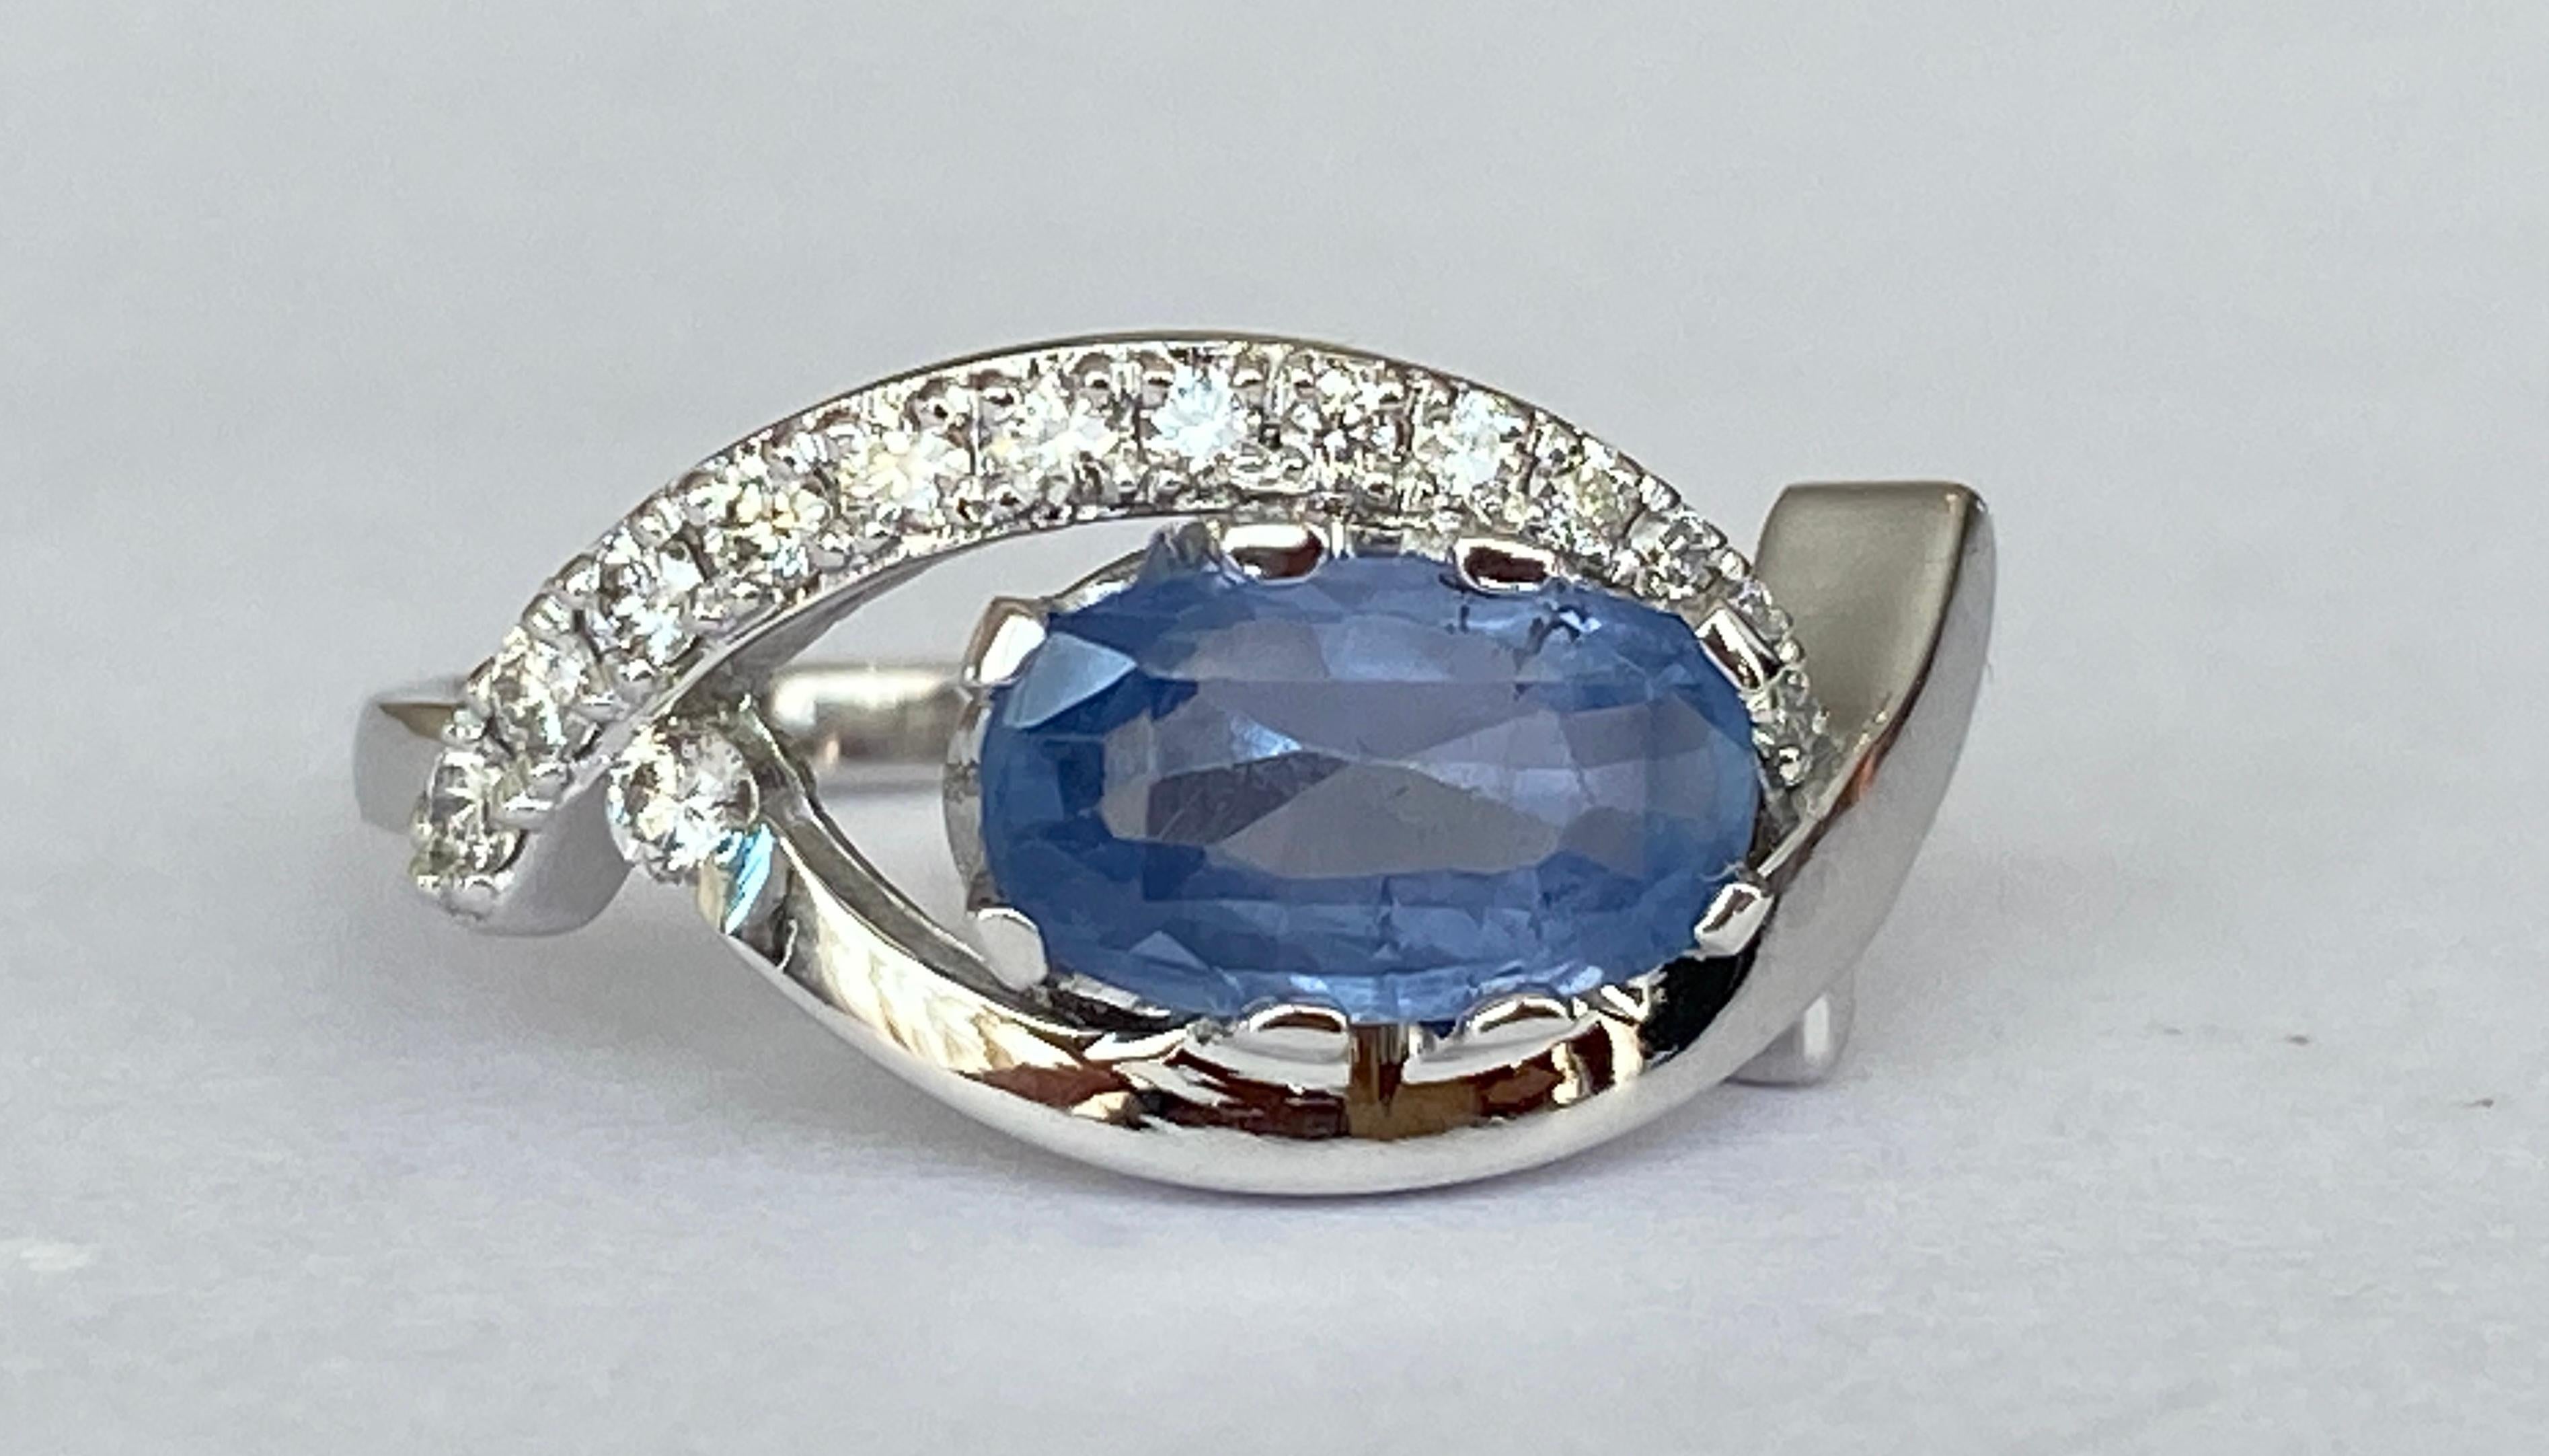 Exclusive  ring in 18 kt white gold set with oval mixed cut sapphire of 1.85 carats and decorated with 14 pieces of brilliant cut diamonds. Total diamonds:0.25 ct F/G/VS/SI. ALGT certificate for the main stone is included. Number 64460786. 
Gold